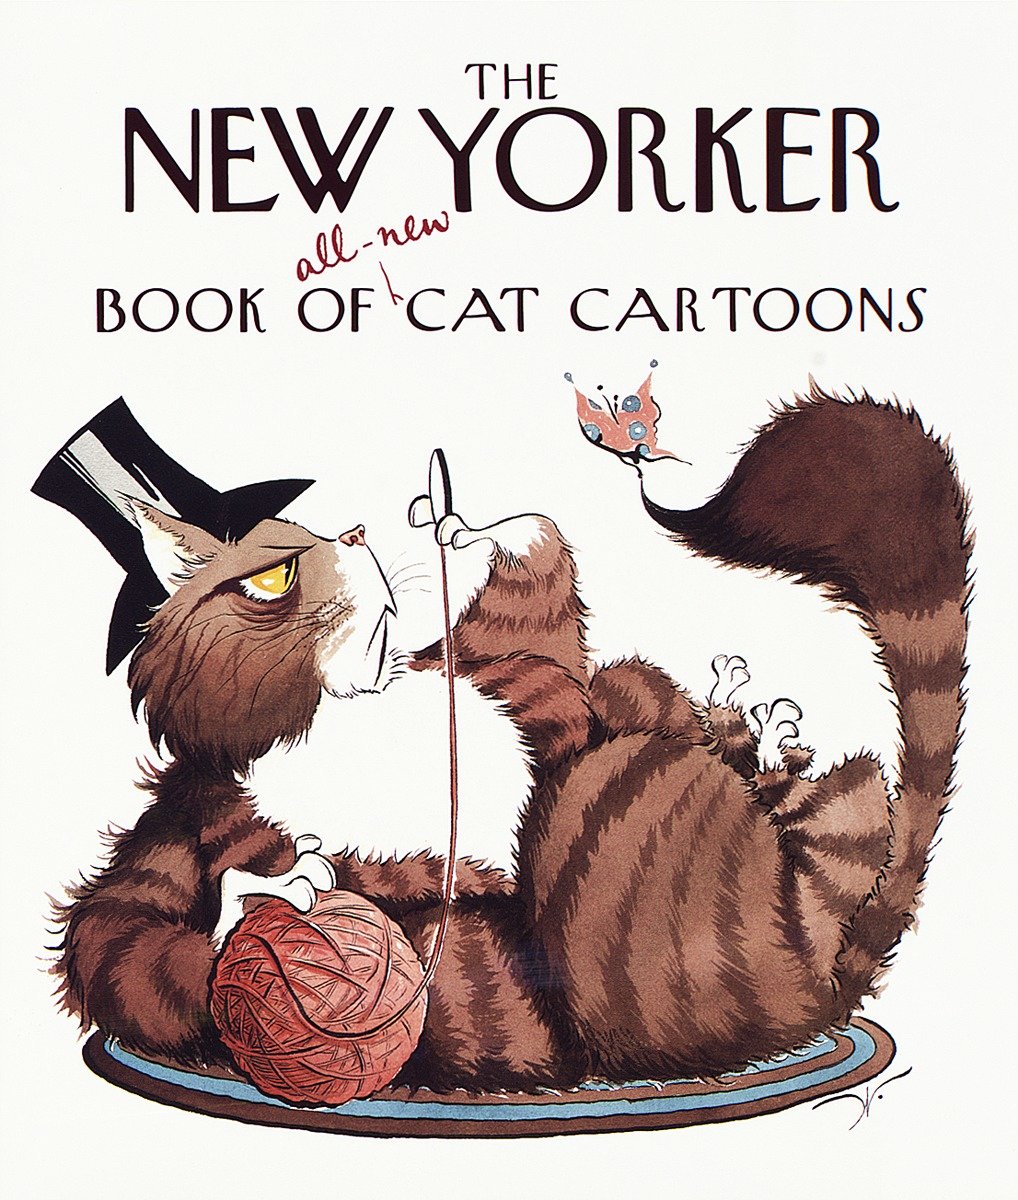 The New Yorker Book Of All-New Cat Cartoons (Hardcover Book)